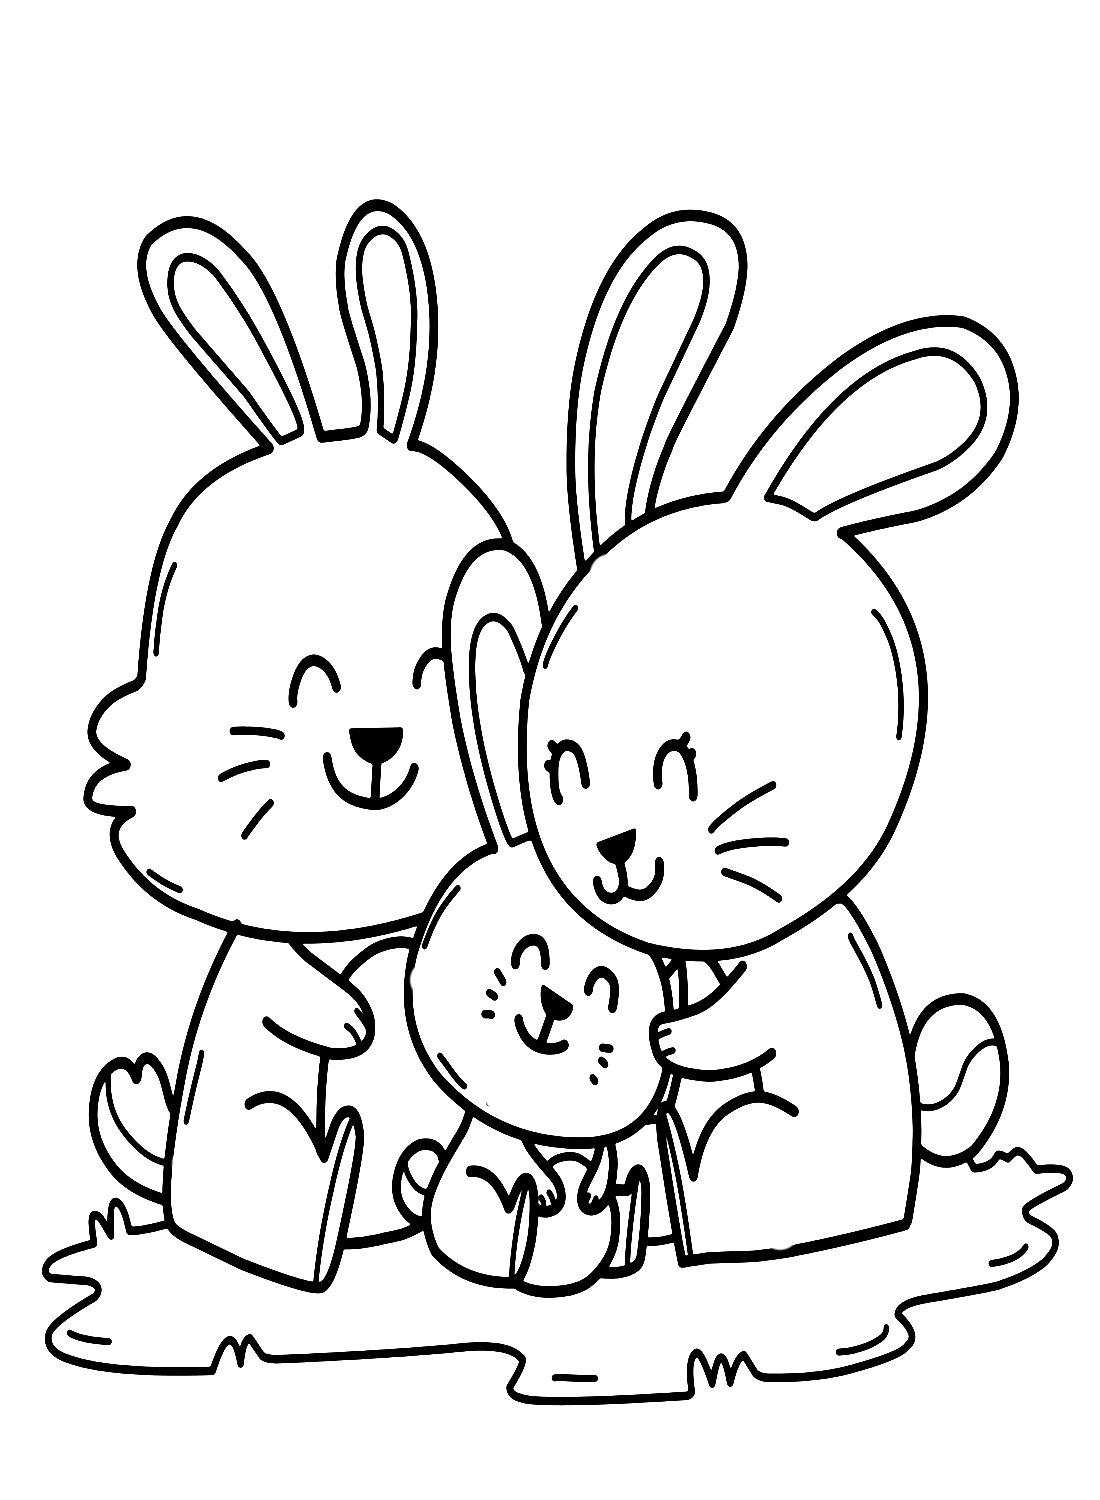 Rabbit Family Hugging Each Other from Rabbit